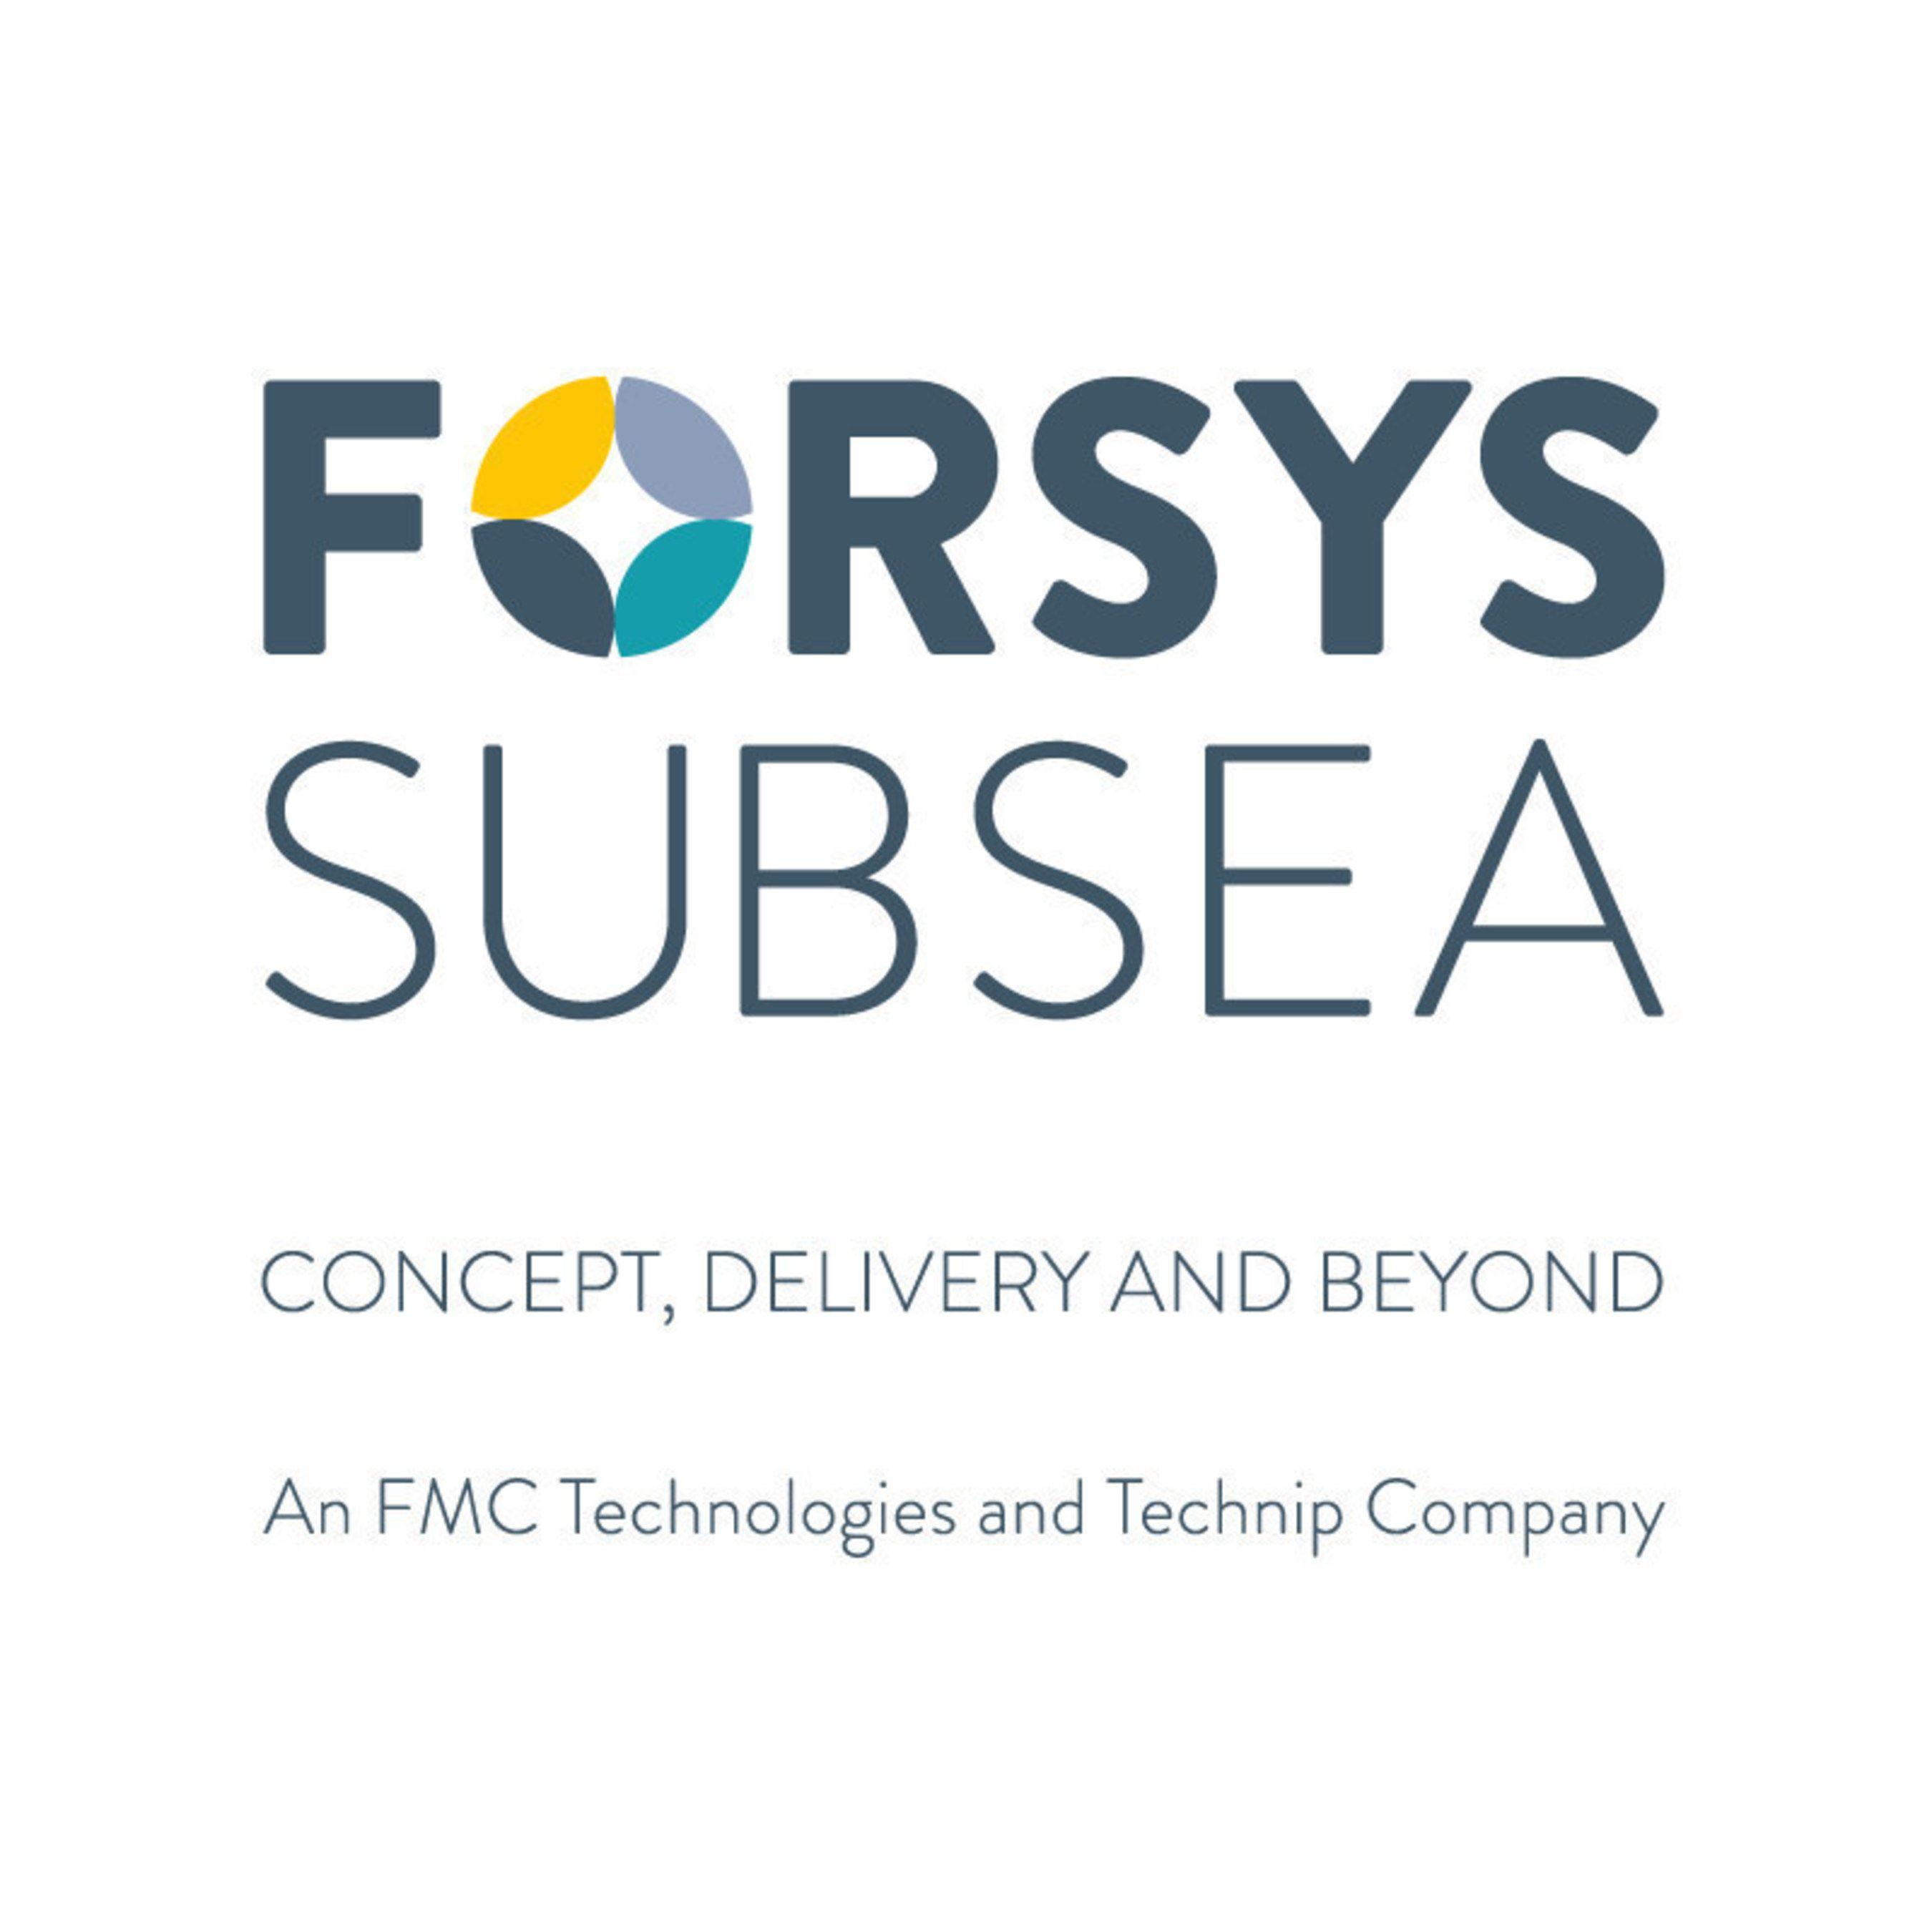 Technip Logo - FMC Technologies and Technip to launch Forsys Subsea